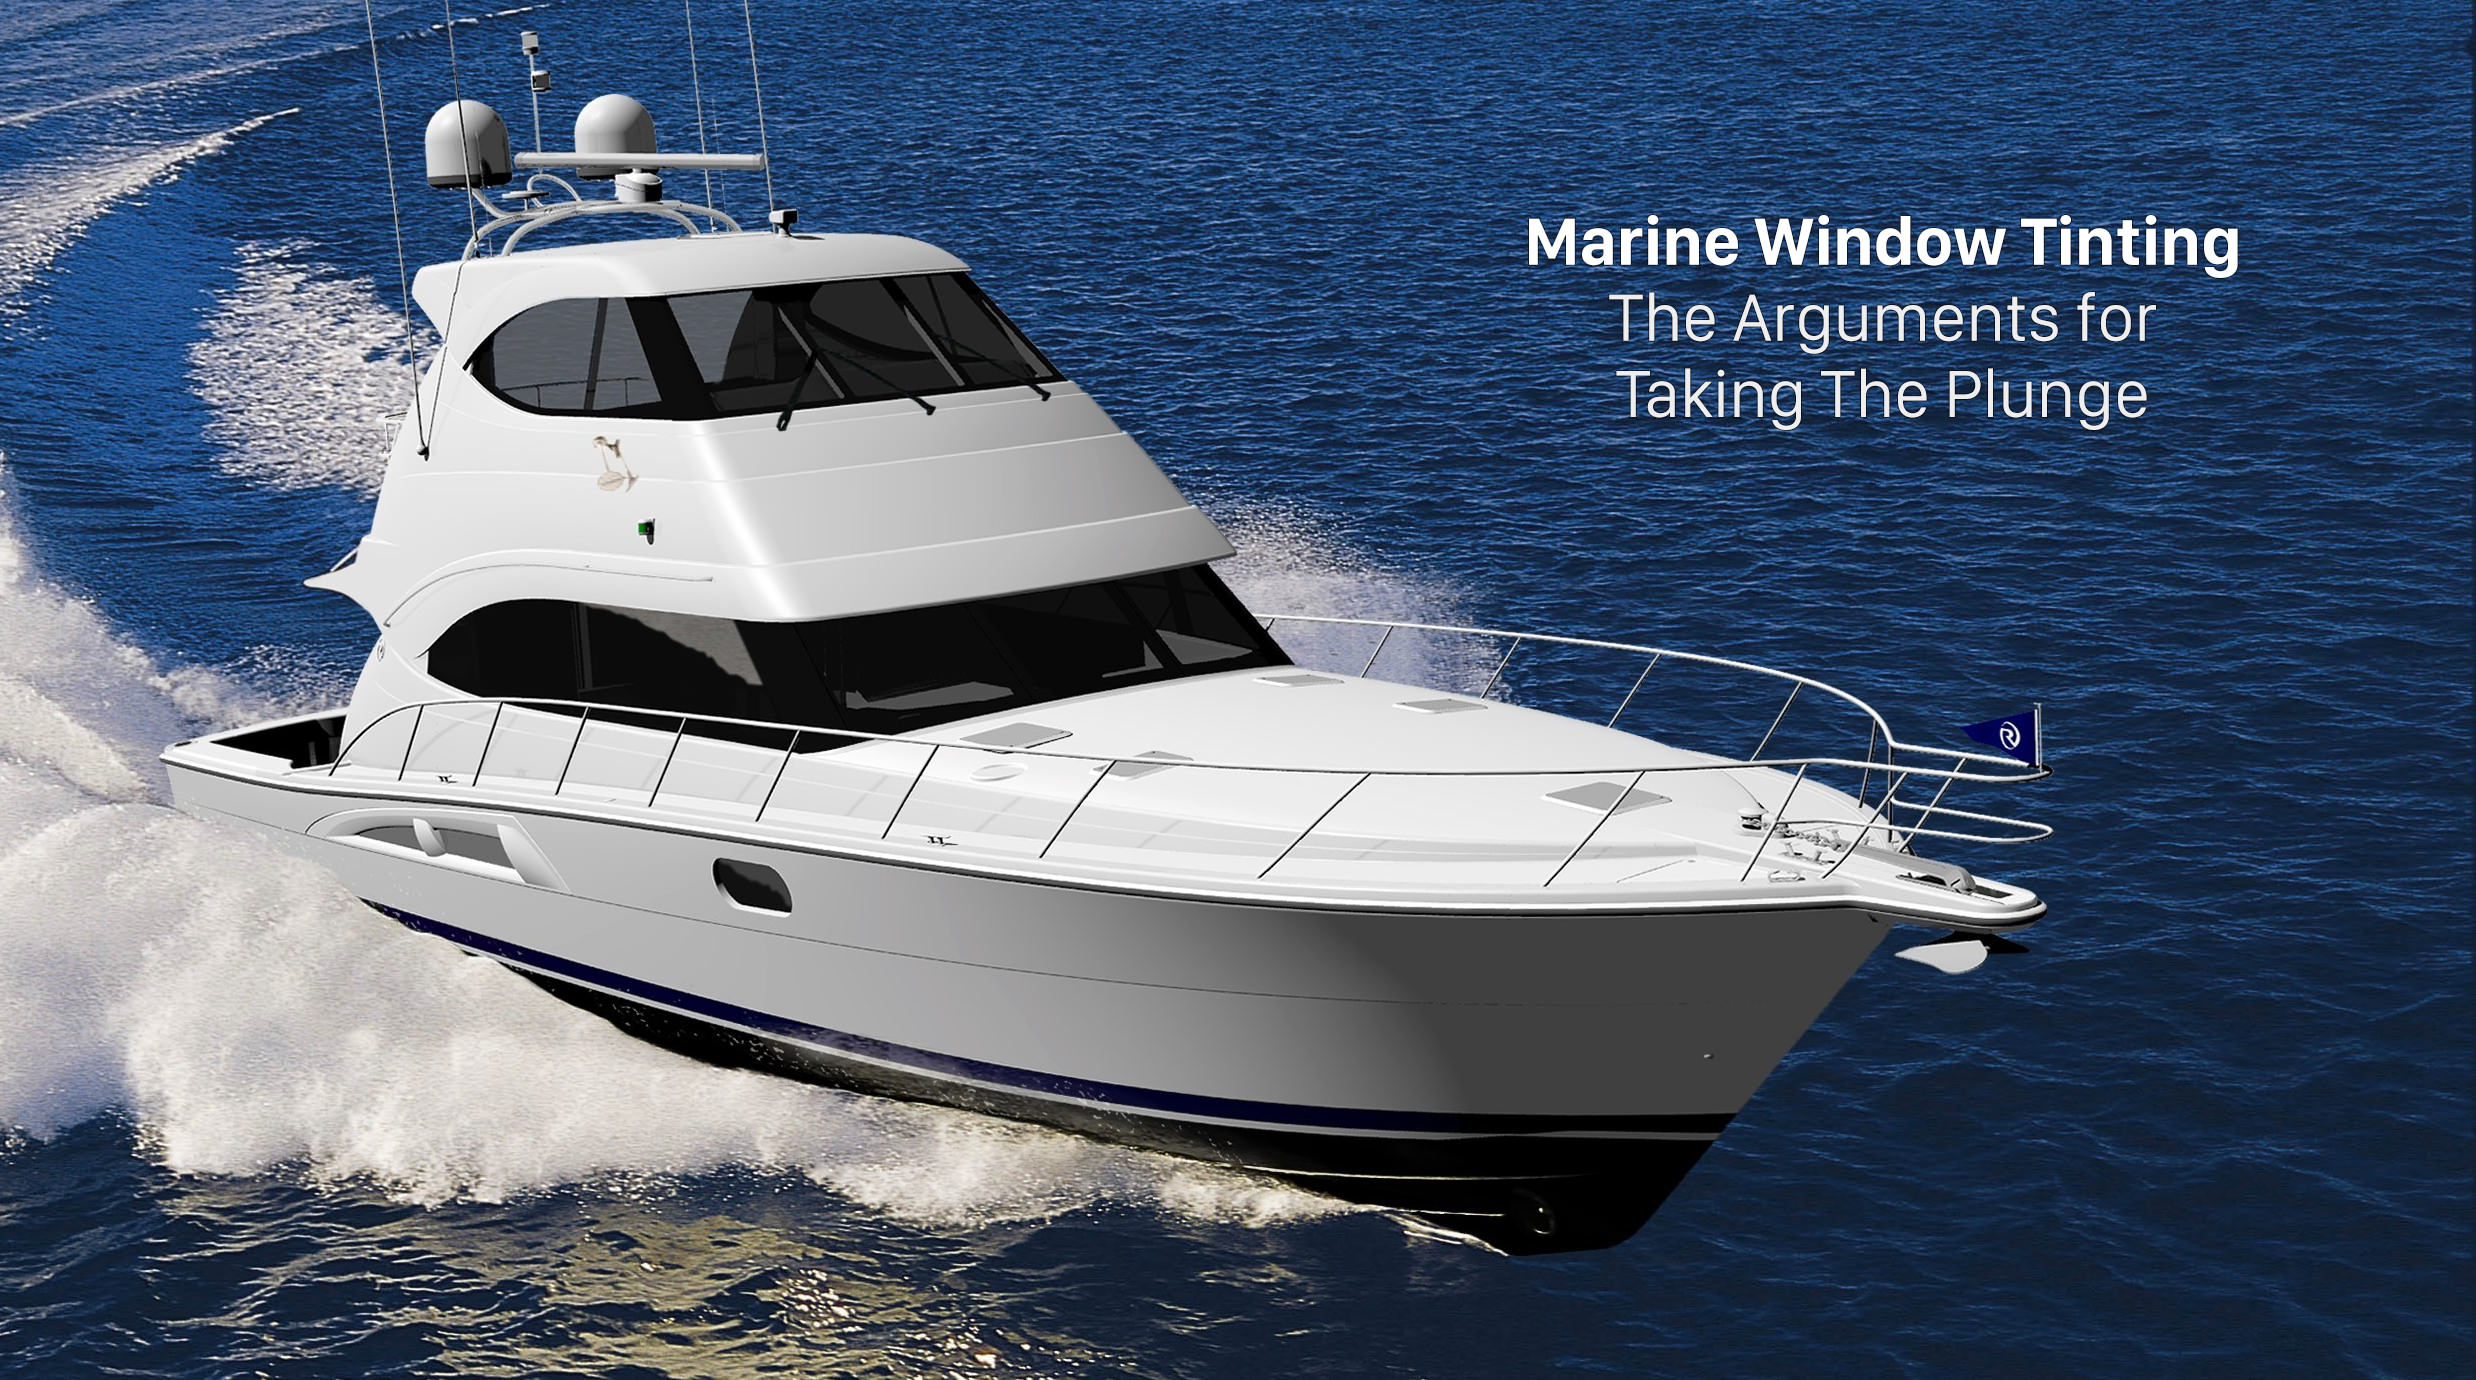 The Argument For Marine Window Tinting